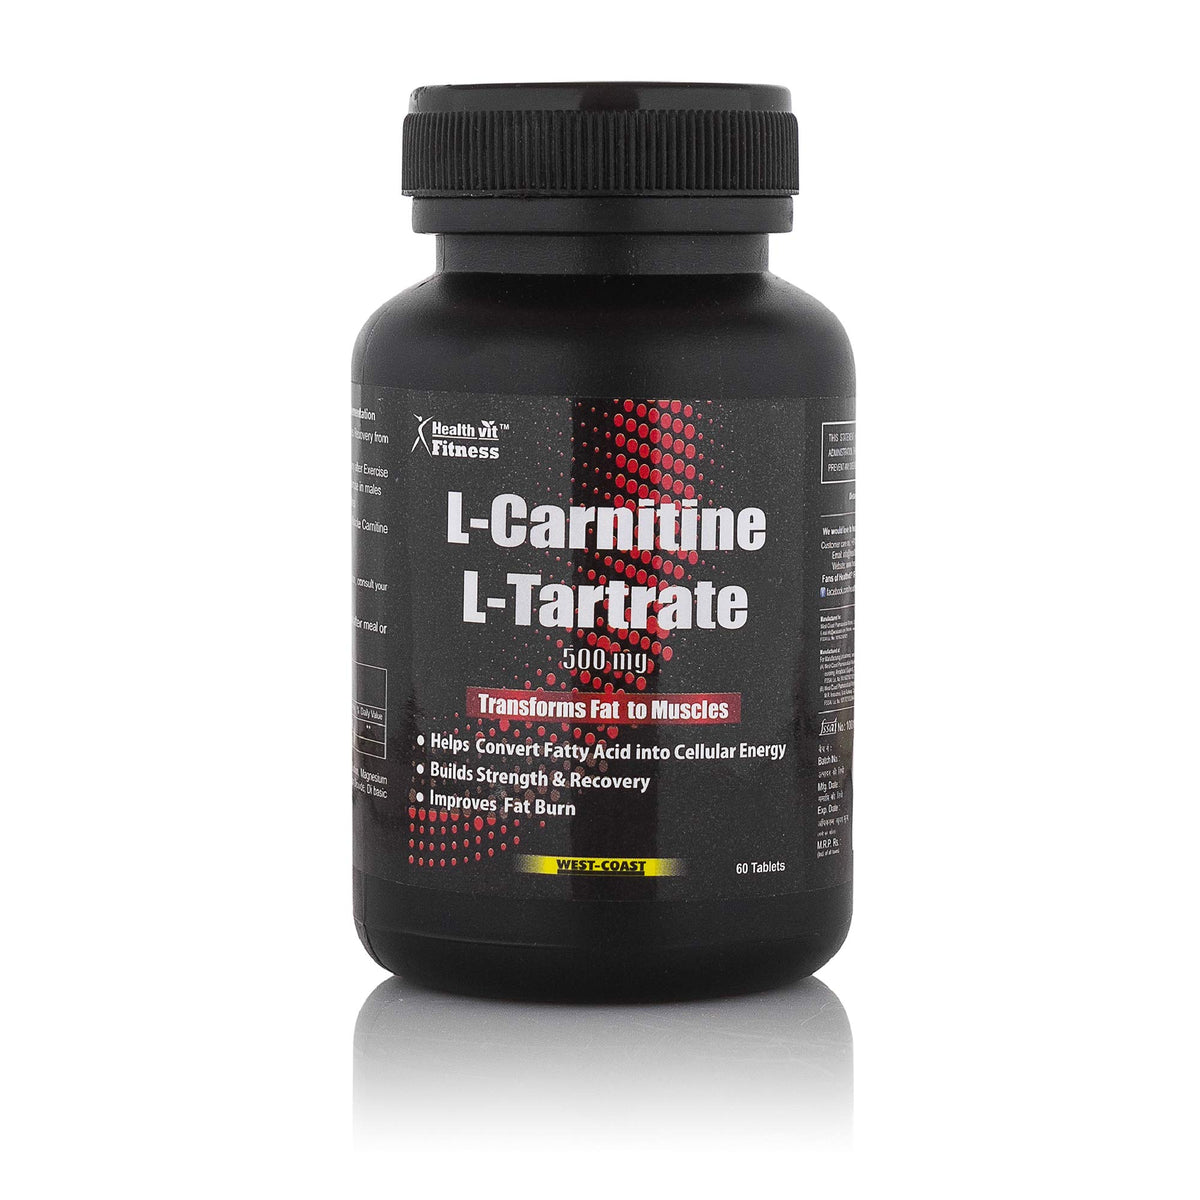 Healthvit L-Carnitine L-Tartrate 500 mg | Weight Loss Supplement, Fat Burner, Muscle Recovery, Pre & Post workout Supplement - 60 Tablets